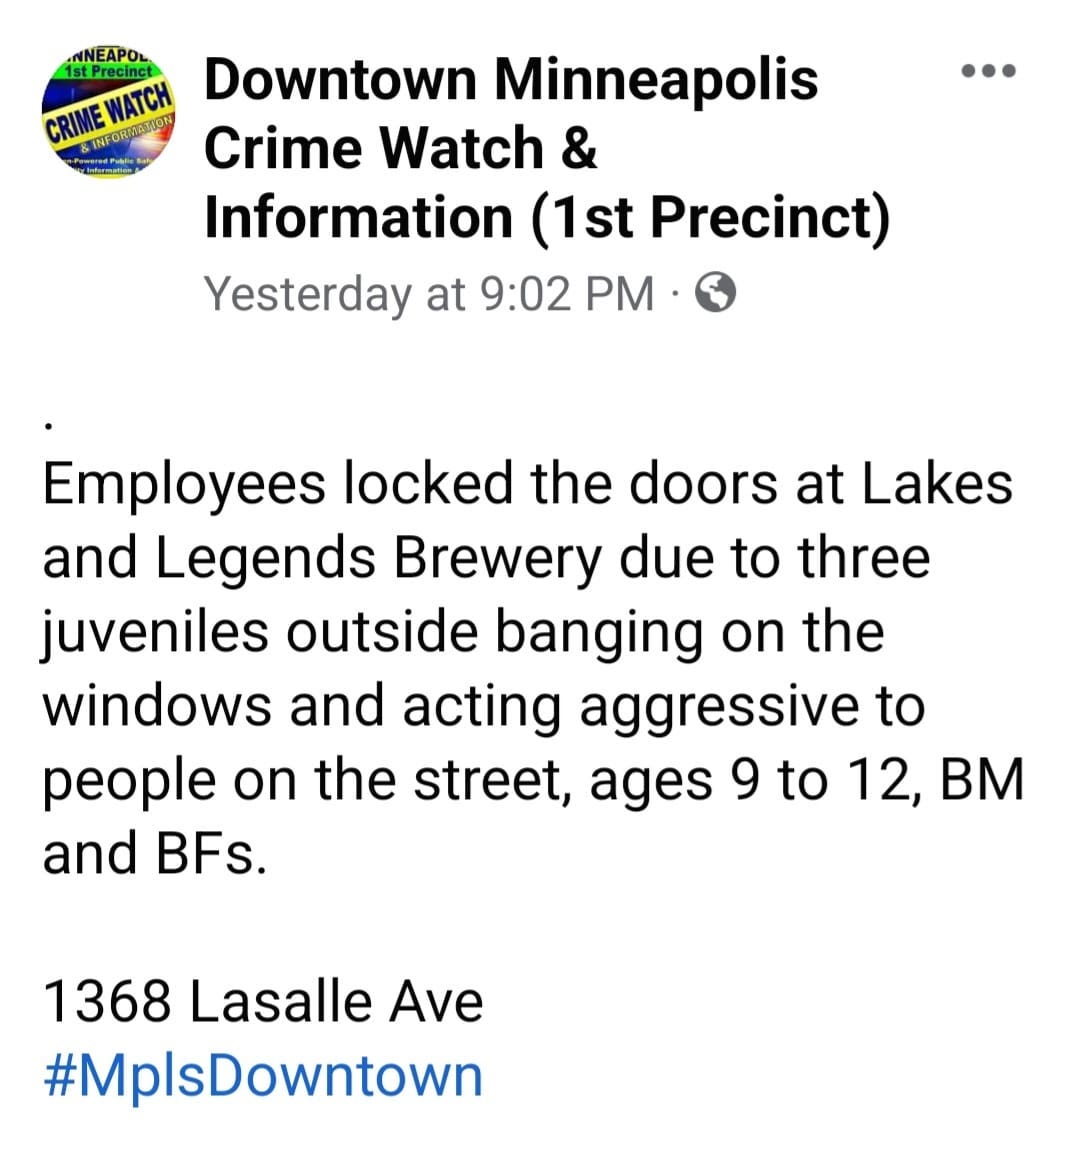 May be an image of text that says 'CRIME Downtown Minneapolis Crime W”tch & Information (1st Precinct) Yesterday at 9:02 PM Employees locked the doors at Lakes and Legends Brewery due to three juveniles outside banging on the windows and acting aggressive to people on the street, ages 9 to 12, BM and BFs. 1368 Lasalle Ave #MplsDowntown'